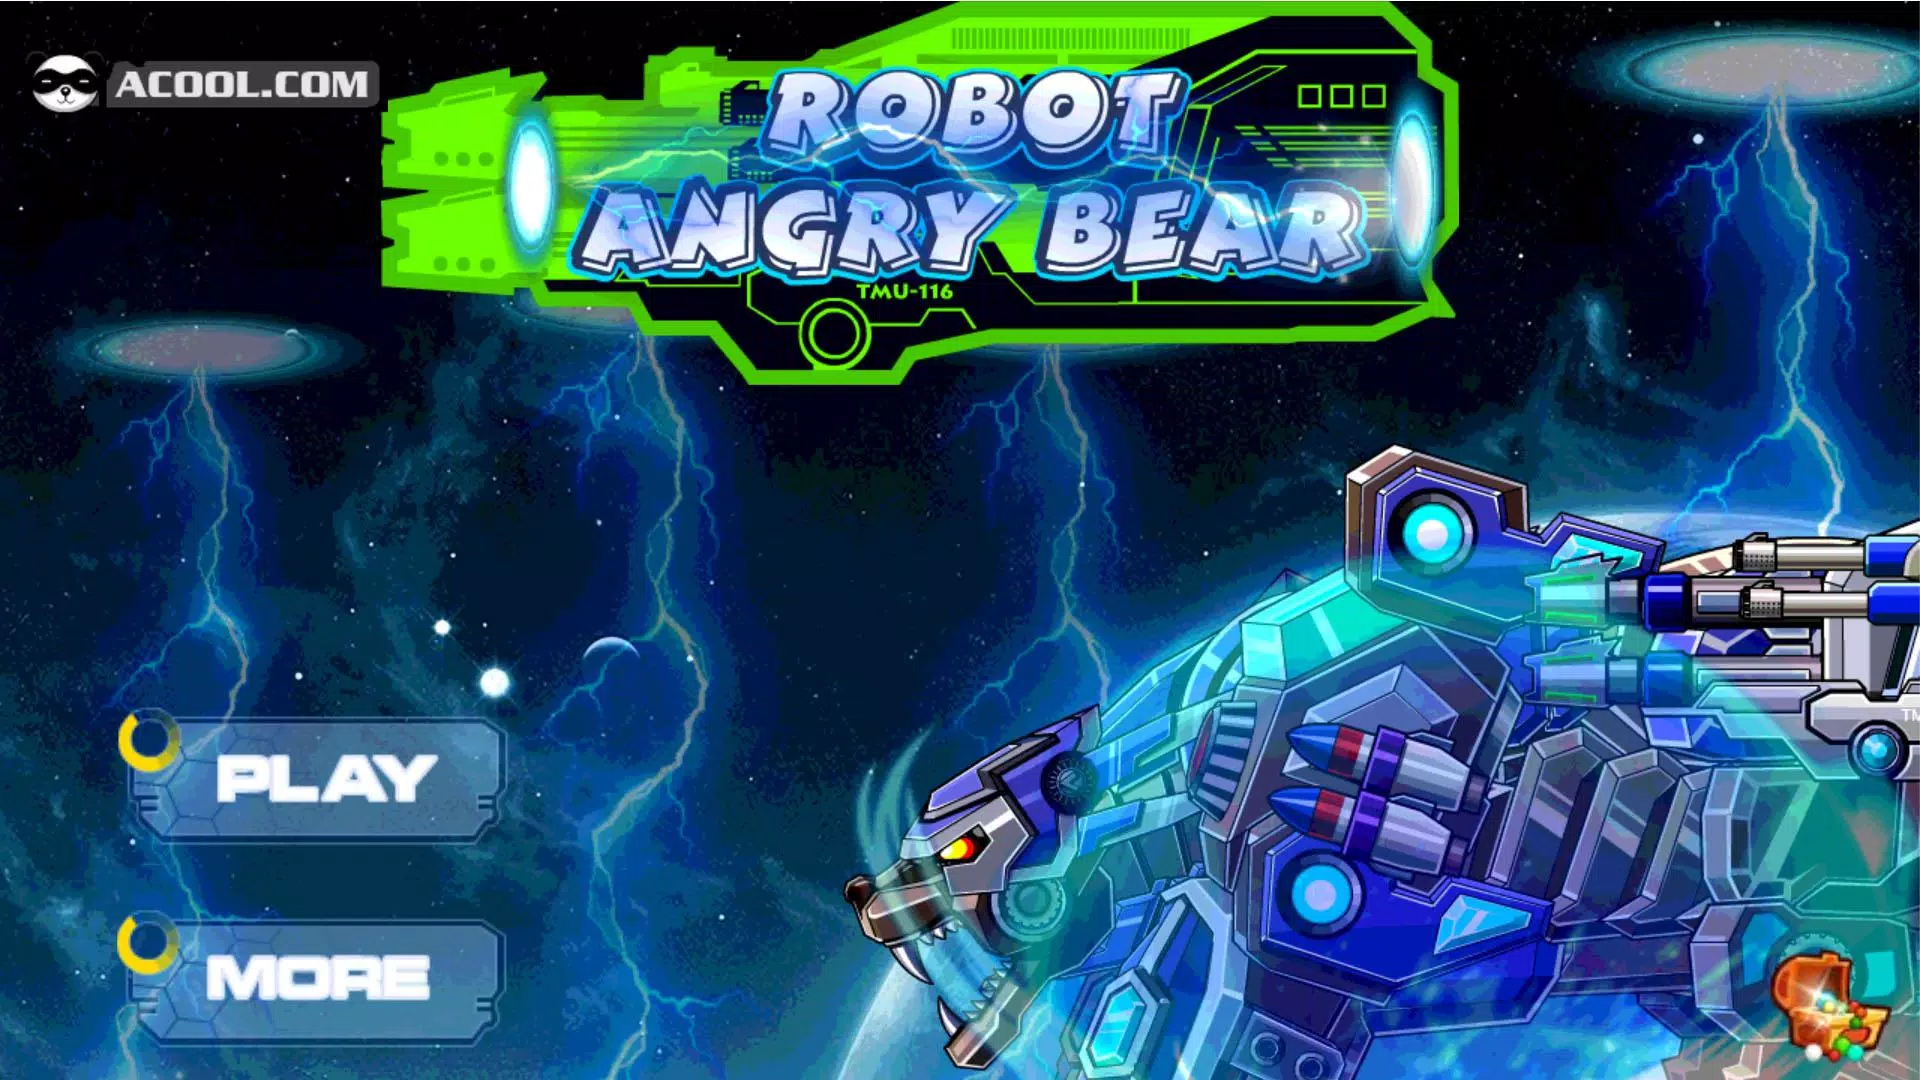 ROBOT ANGRY BEAR GAME (Full Gameplay) - Y8 GAMES